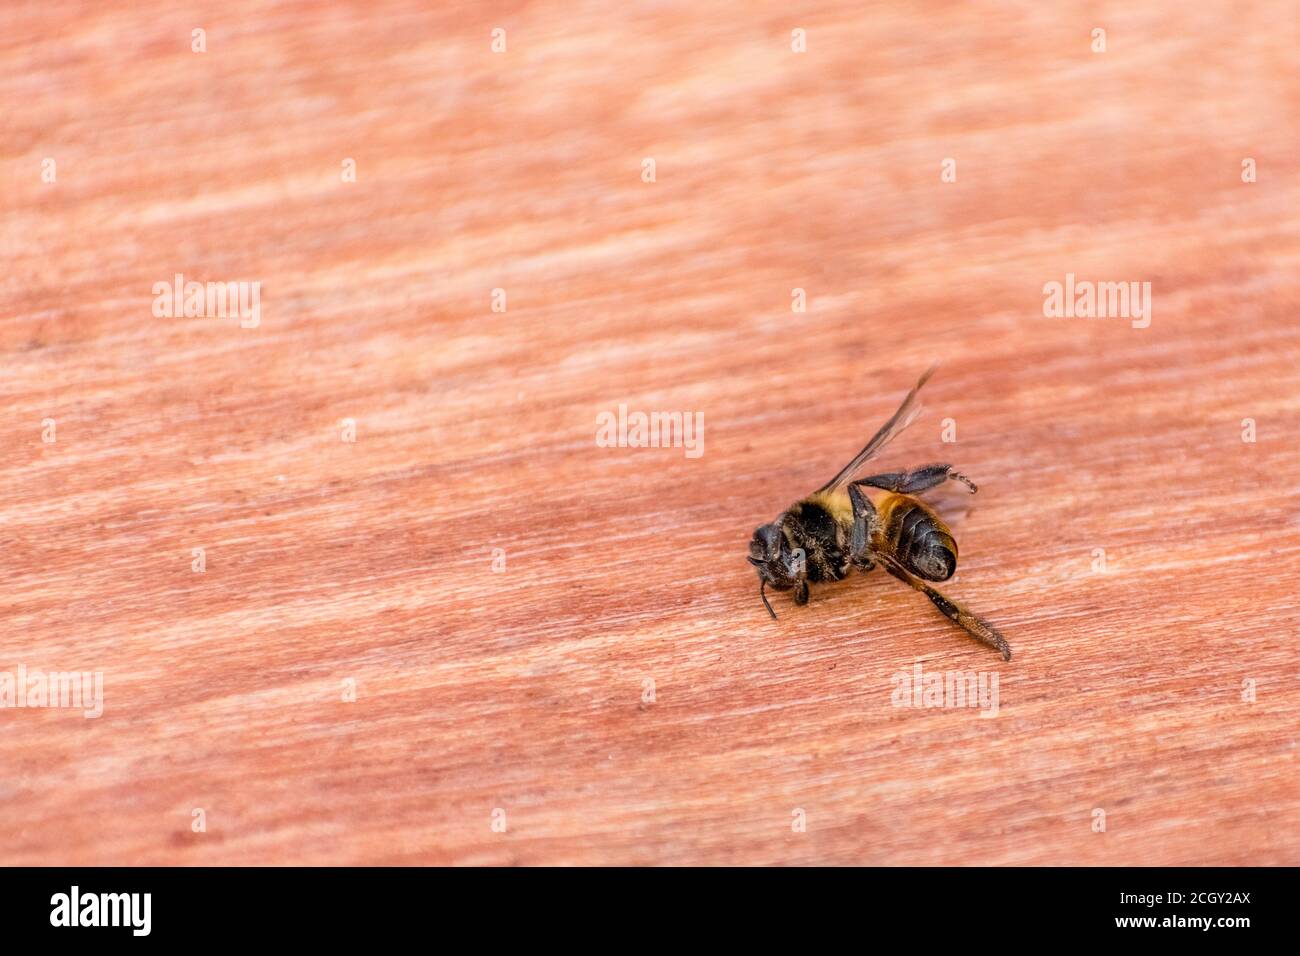 Indian honey bee dead body on a wooden tray Stock Photo